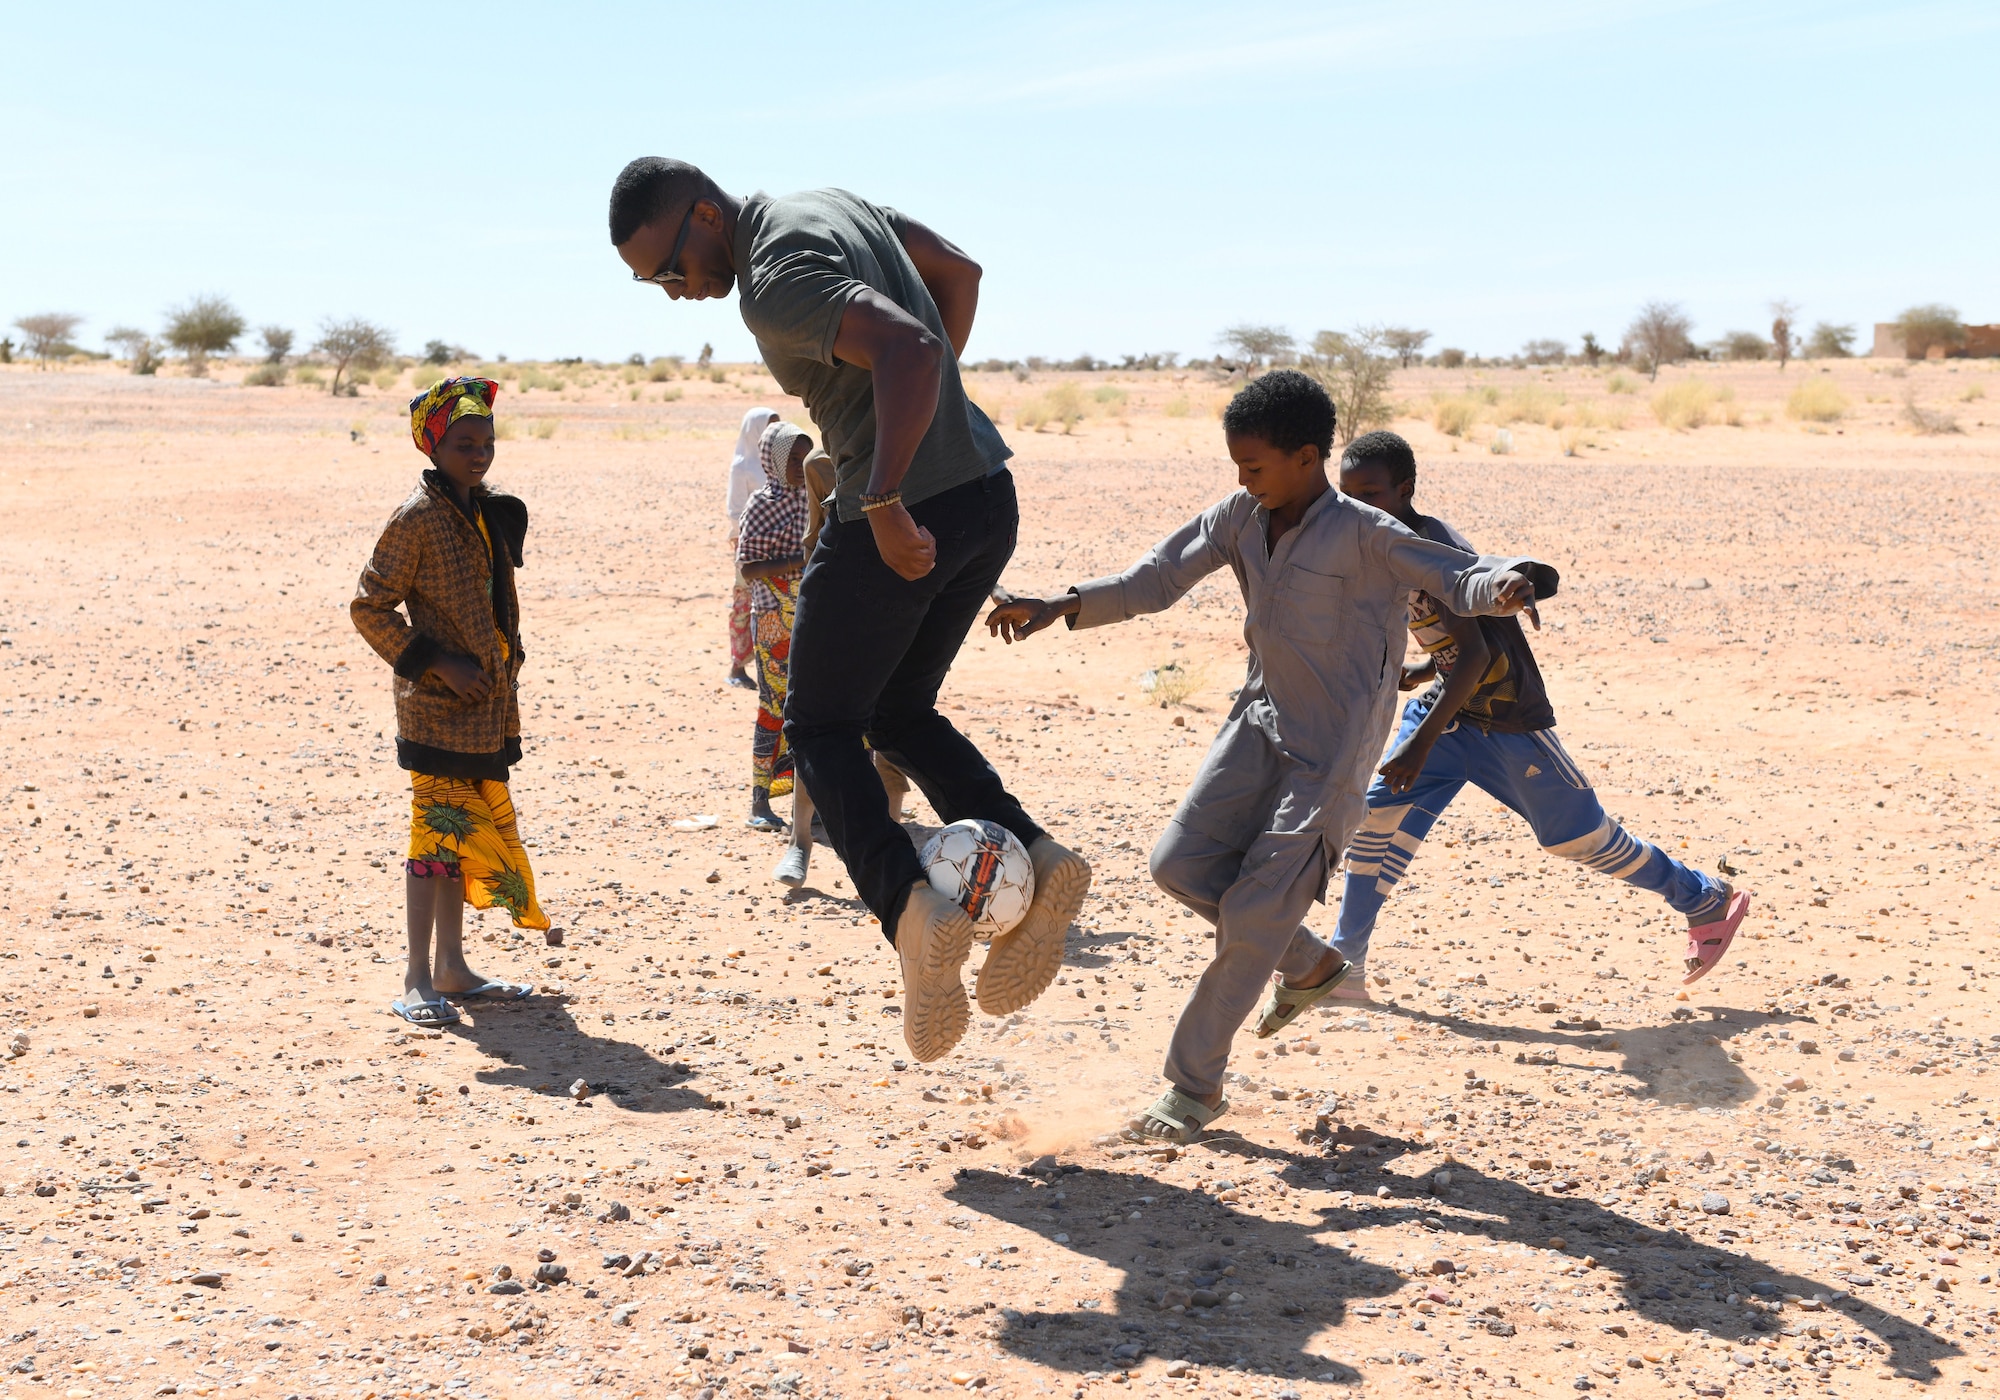 U.S. Air Force Senior Airman Ciscero Warren, 724th Expeditionary Air Base Squadron Logistics Readiness Flight fuels distribution technician, plays soccer with local school children after a dental hygiene course in the village of Tsakatalam, Niger, Dec. 14, 2019. The U.S. Army 443rd Civil Affairs Battalion Civil Affairs Team 219 deployed to Nigerien Air Base 201 partnered with local Agadez city dentist, Dr. Mahaman Aicha, to teach the Tsakatalam Primary School students for the first time how to properly brush and floss their teeth and the importance of good oral health. (U.S. Air Force photo by Staff Sgt. Alex Fox Echols III)